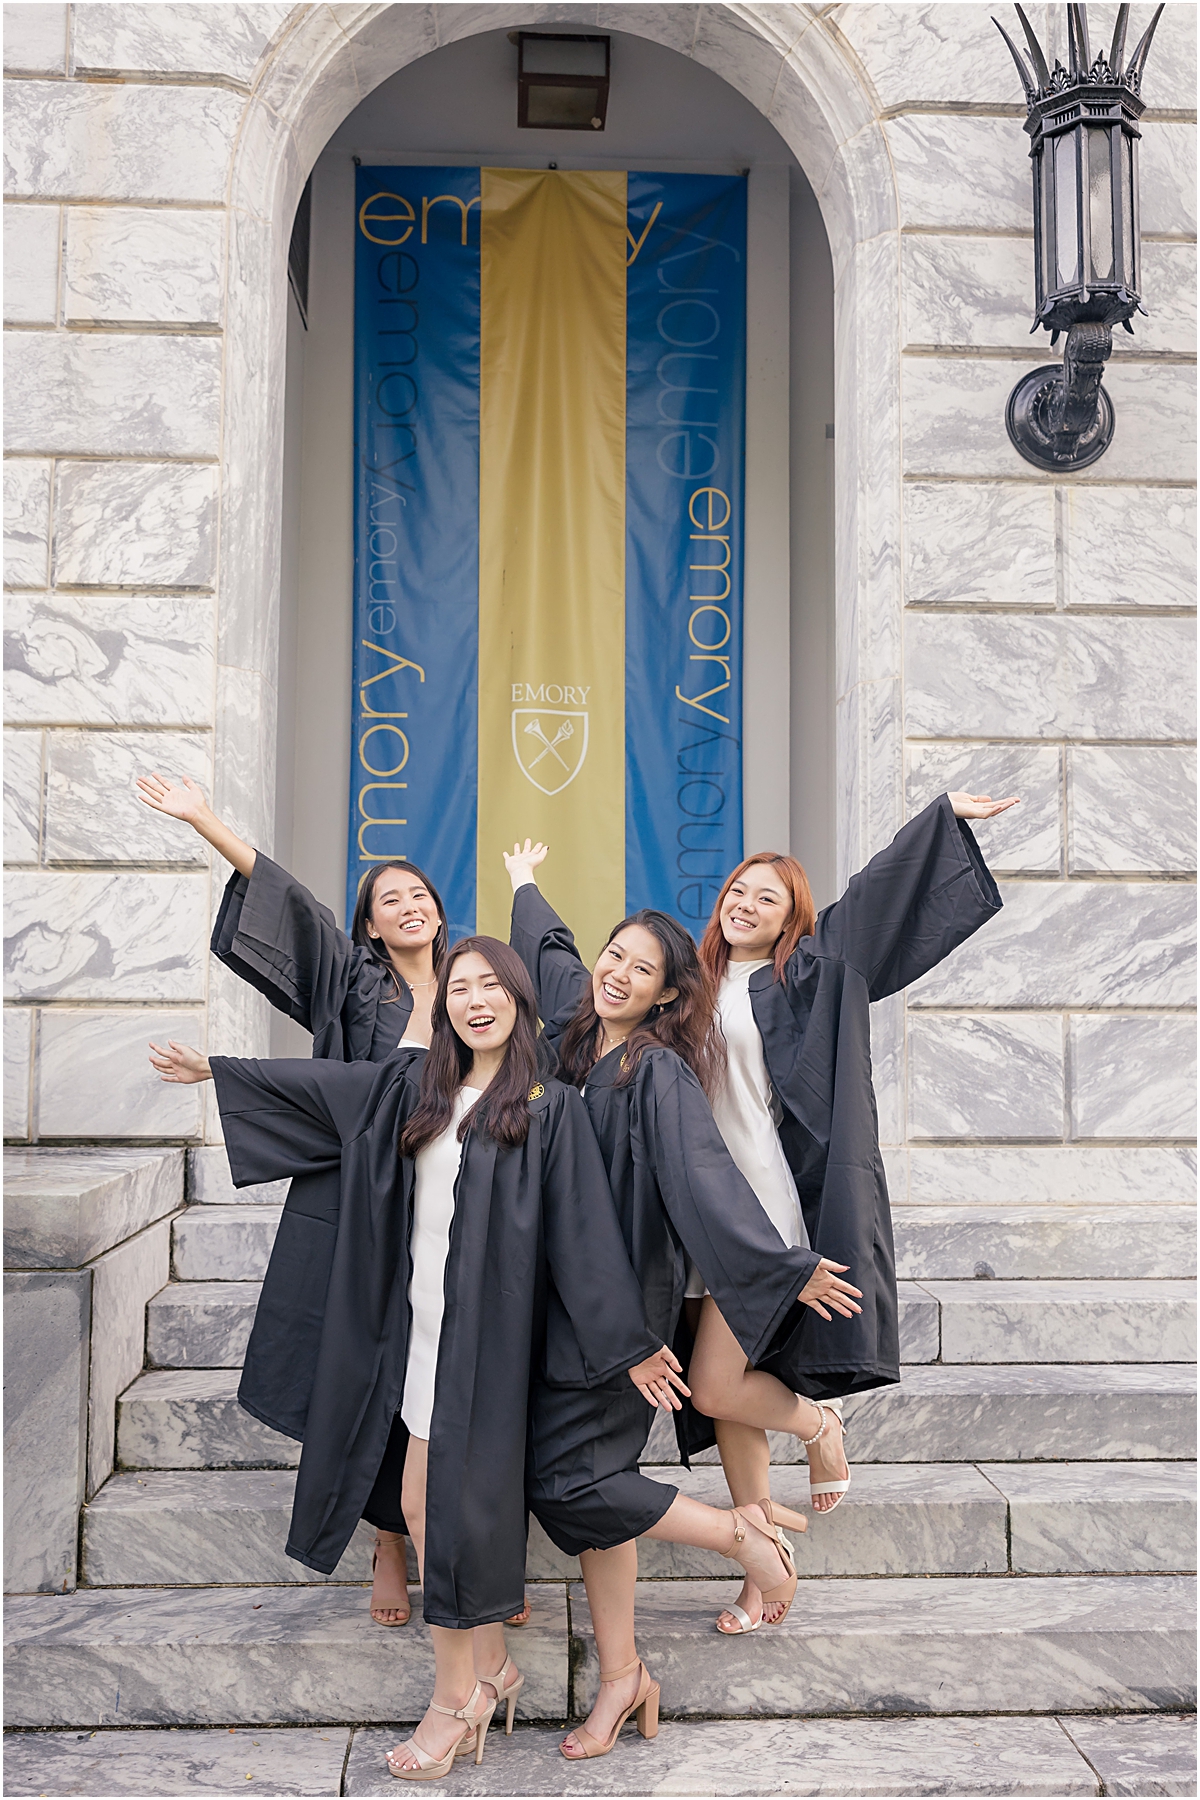 4 Emory University female graduates wearing white dresses and their black graduation gowns posing in front of a blue and gold emory university banner with their hands out stretched